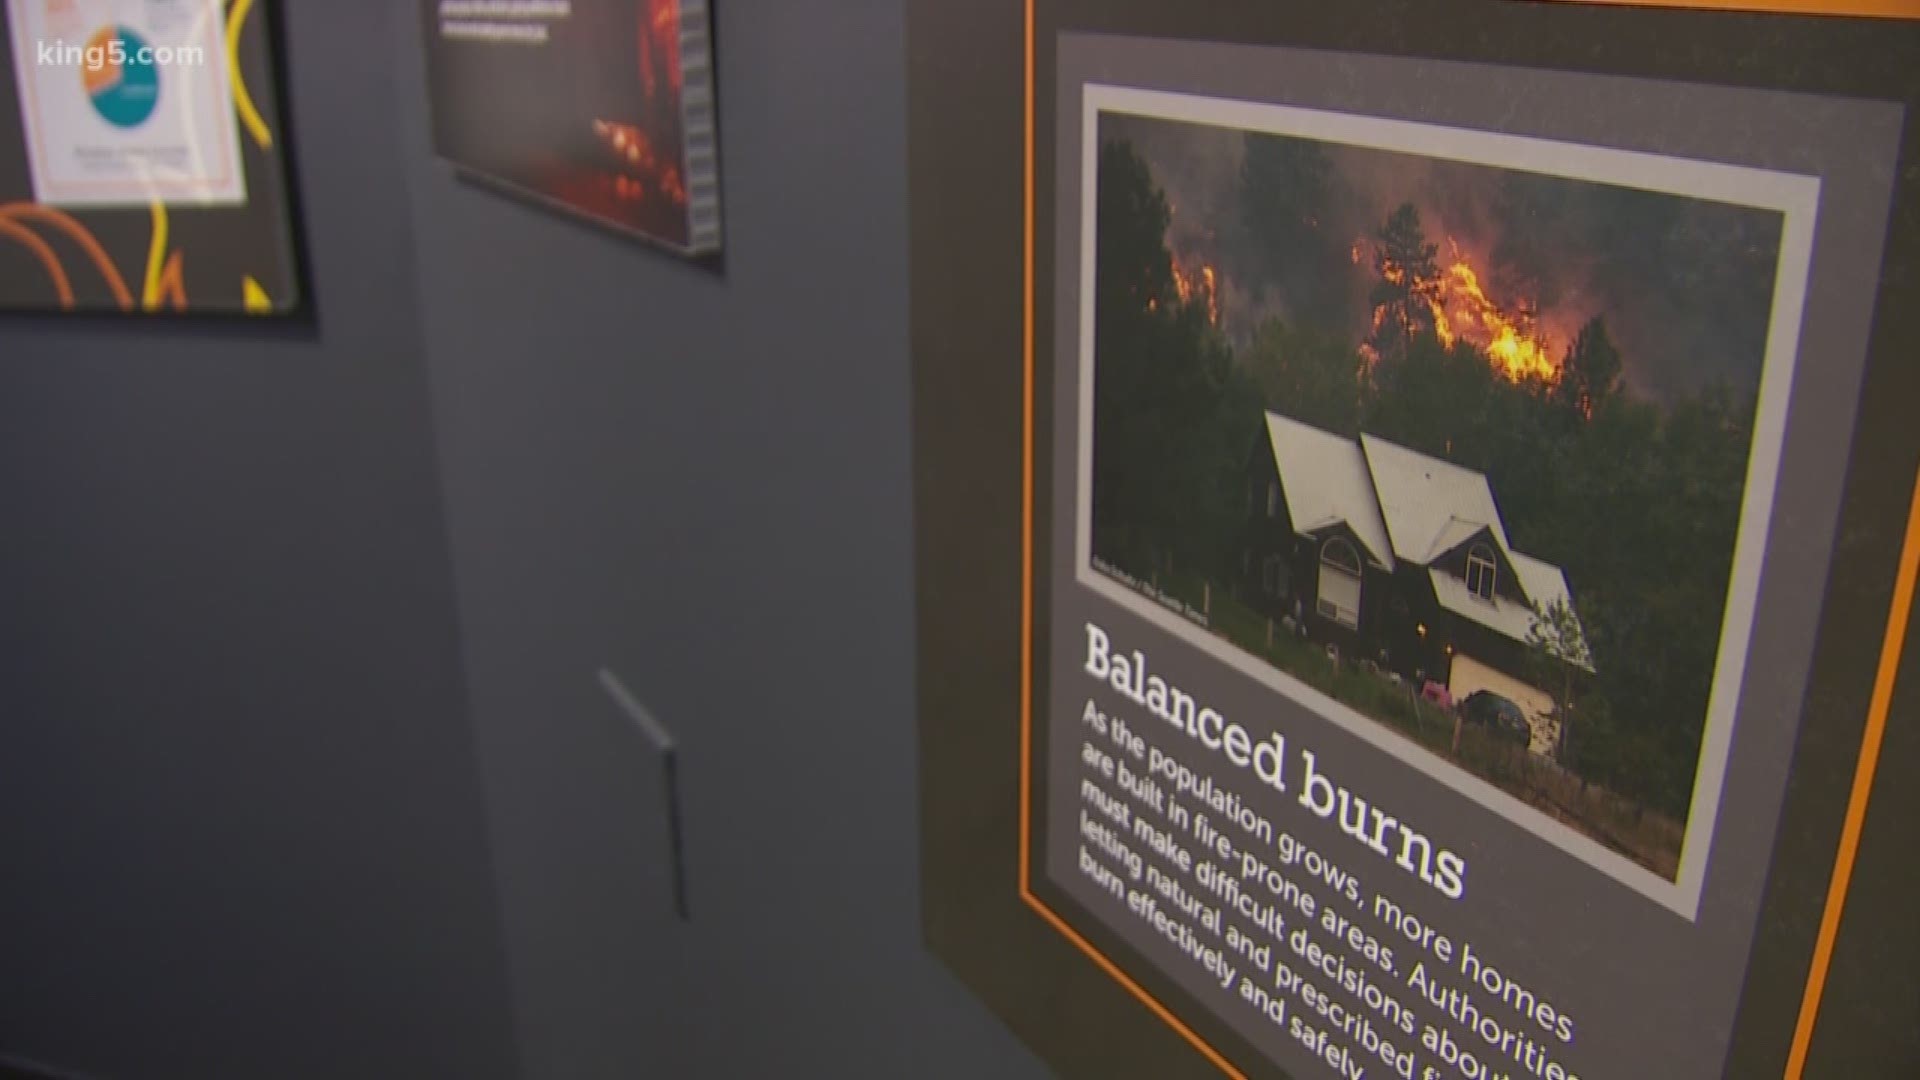 A new exhibit at Pacific Science Center looks to tell the story of wildfires in Washington State.